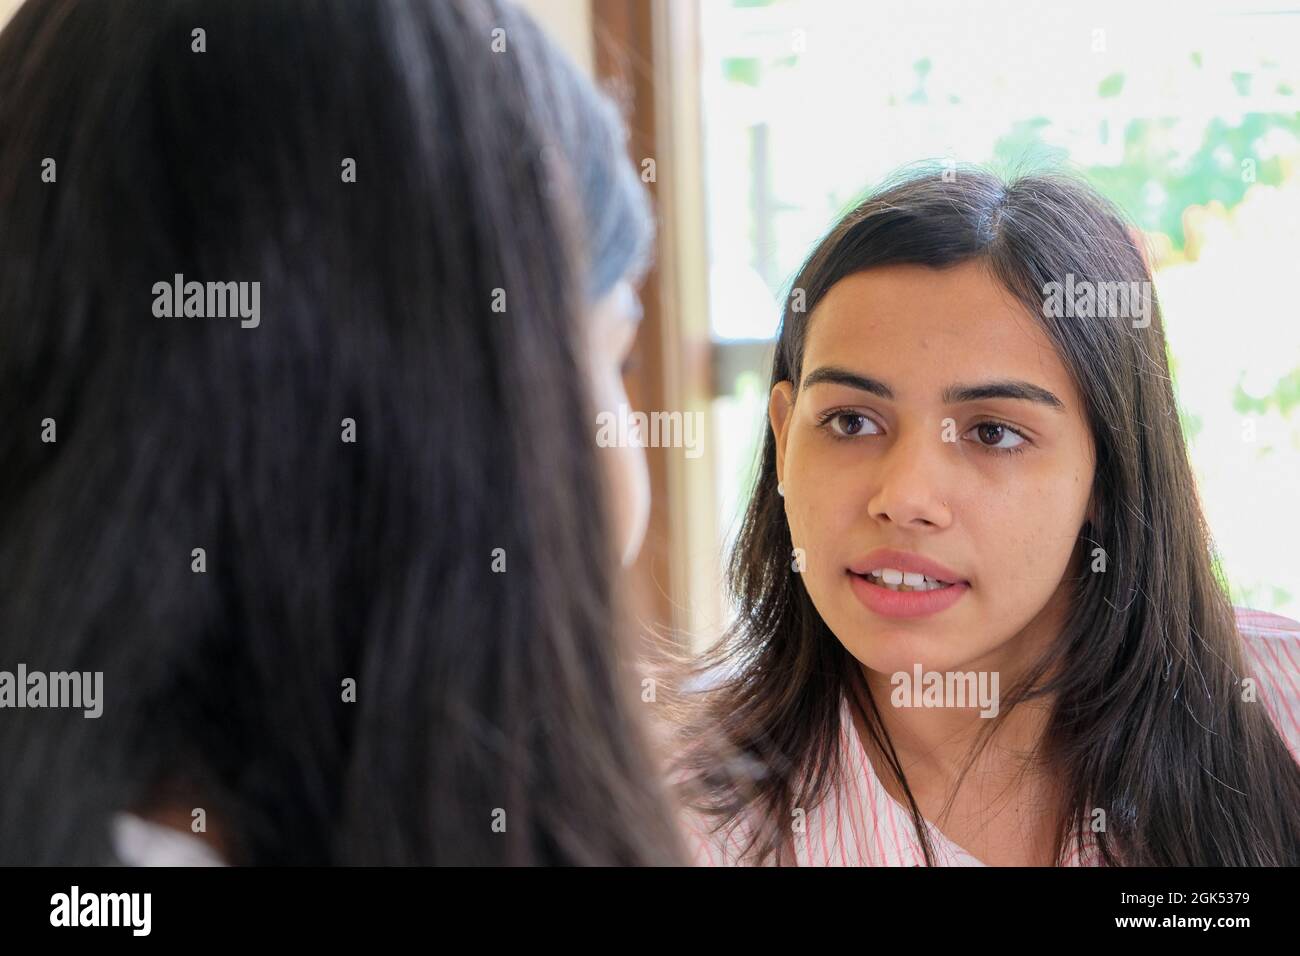 Closeup shot of the face of a young girl during the conversation Stock Photo